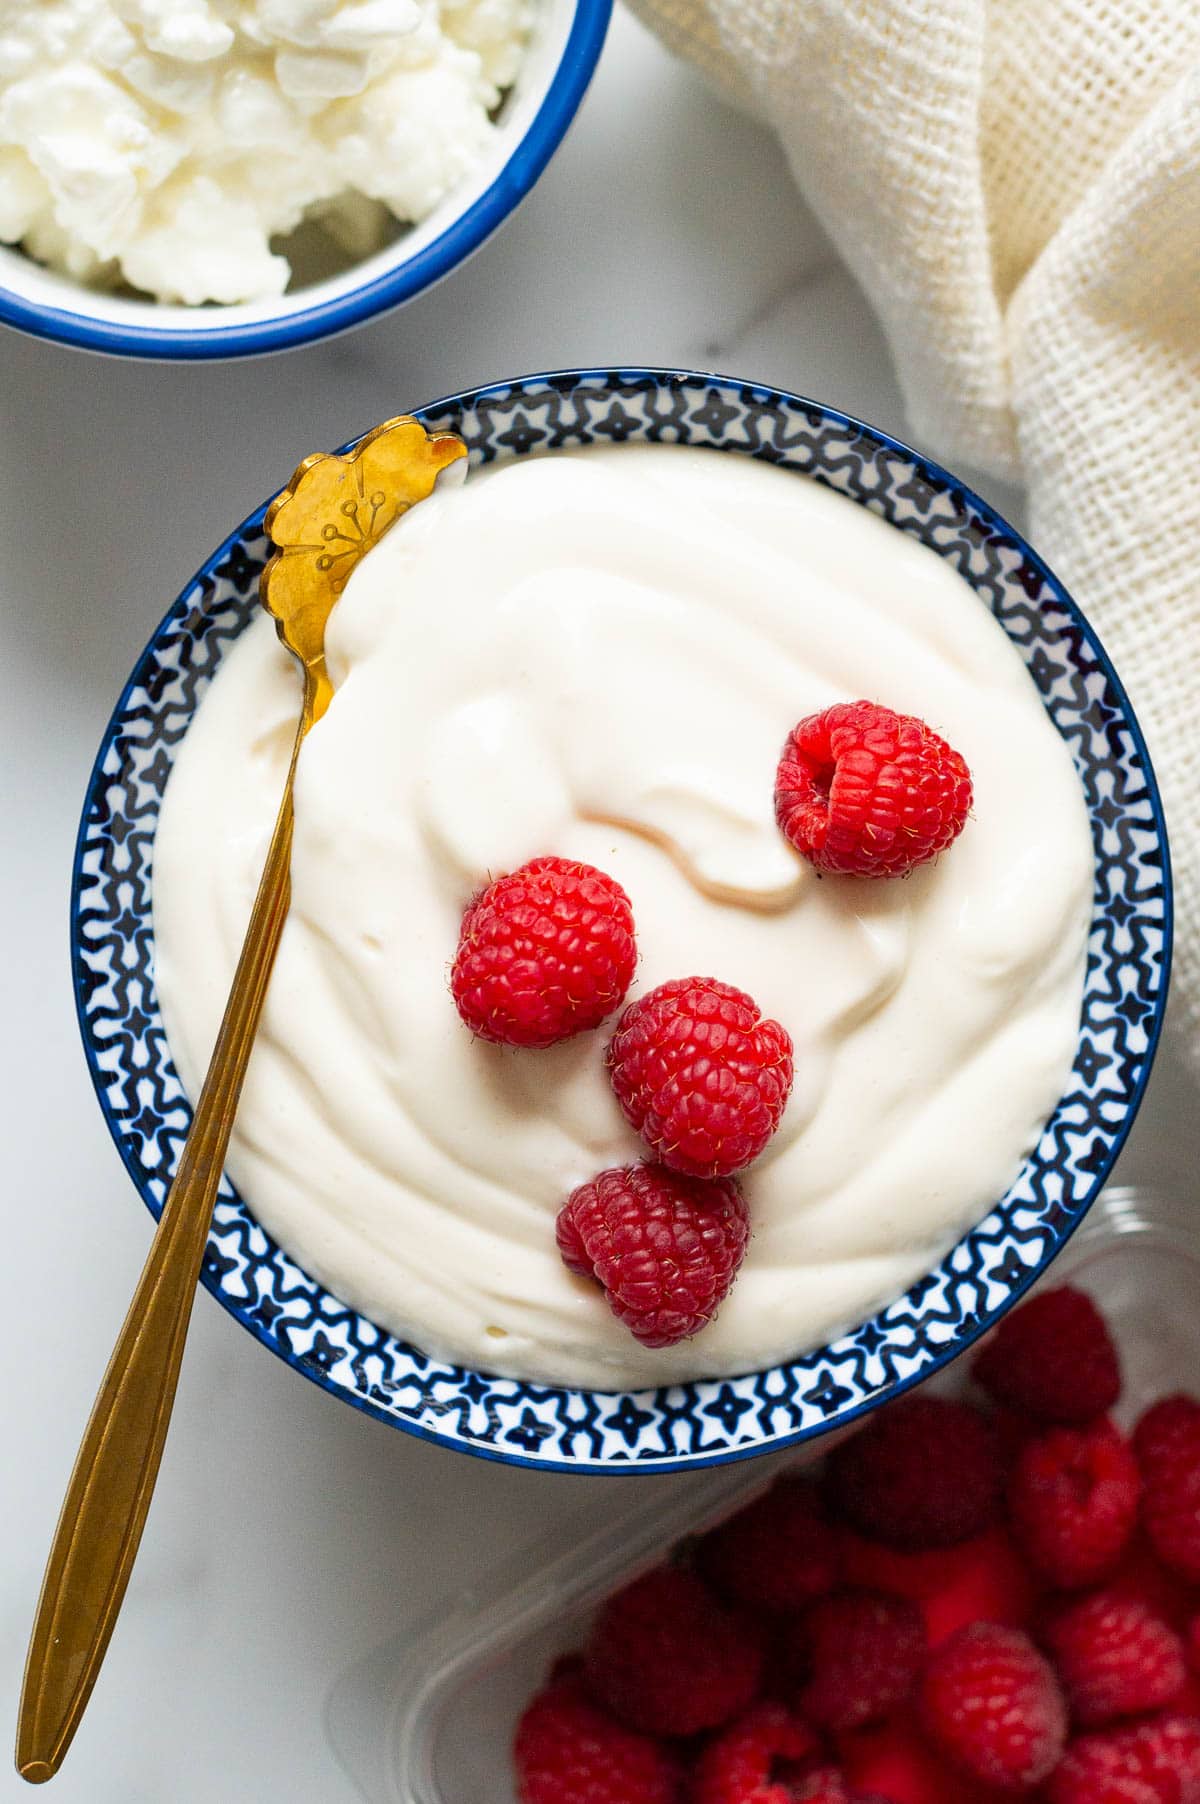 Cottage cheese pudding garnished with fresh raspberries in a serving bowl with a spoon.